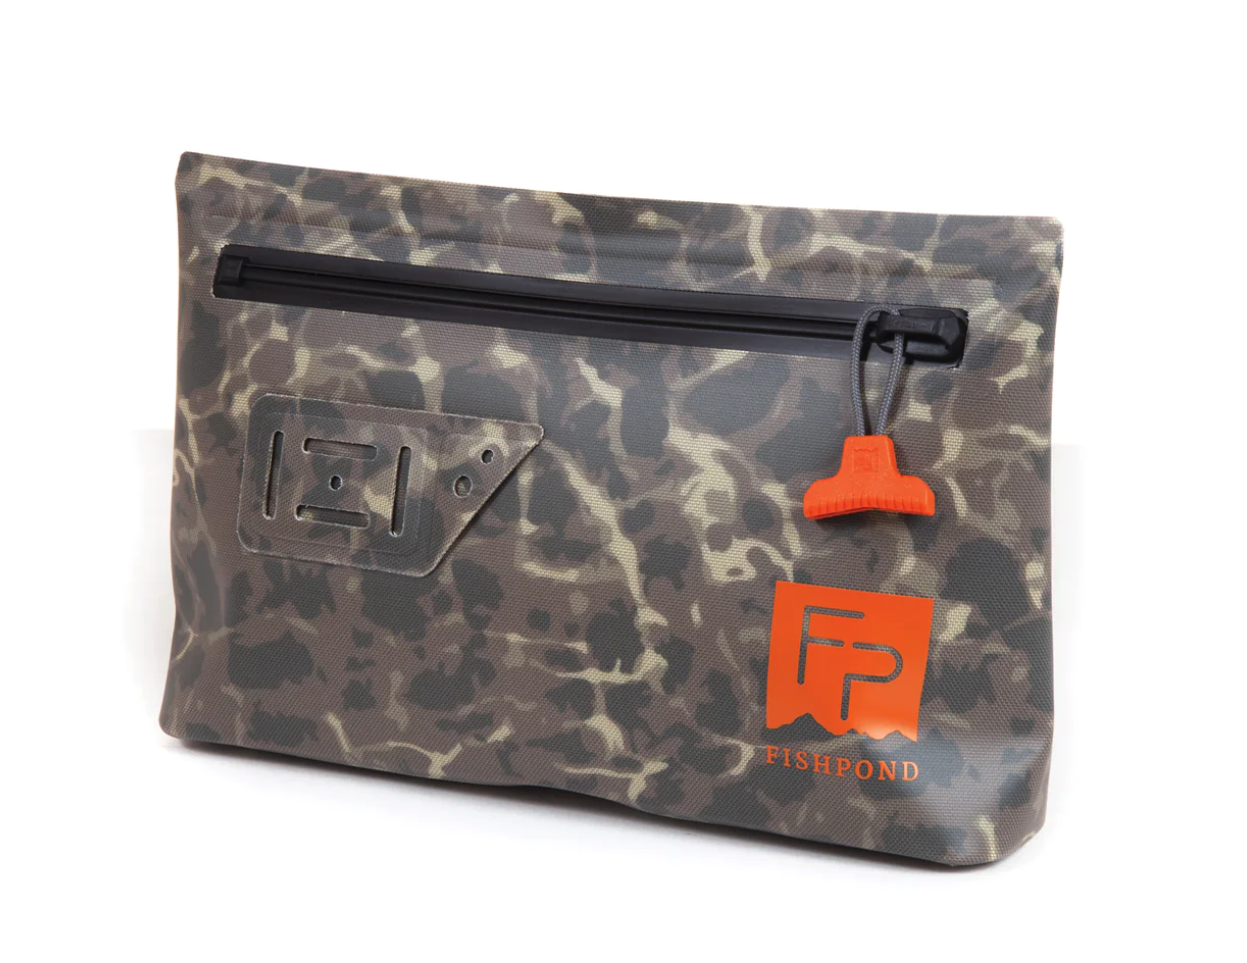 Order Fishpond Thunderhead Submersible Pouch online at TheFlyFishers.com